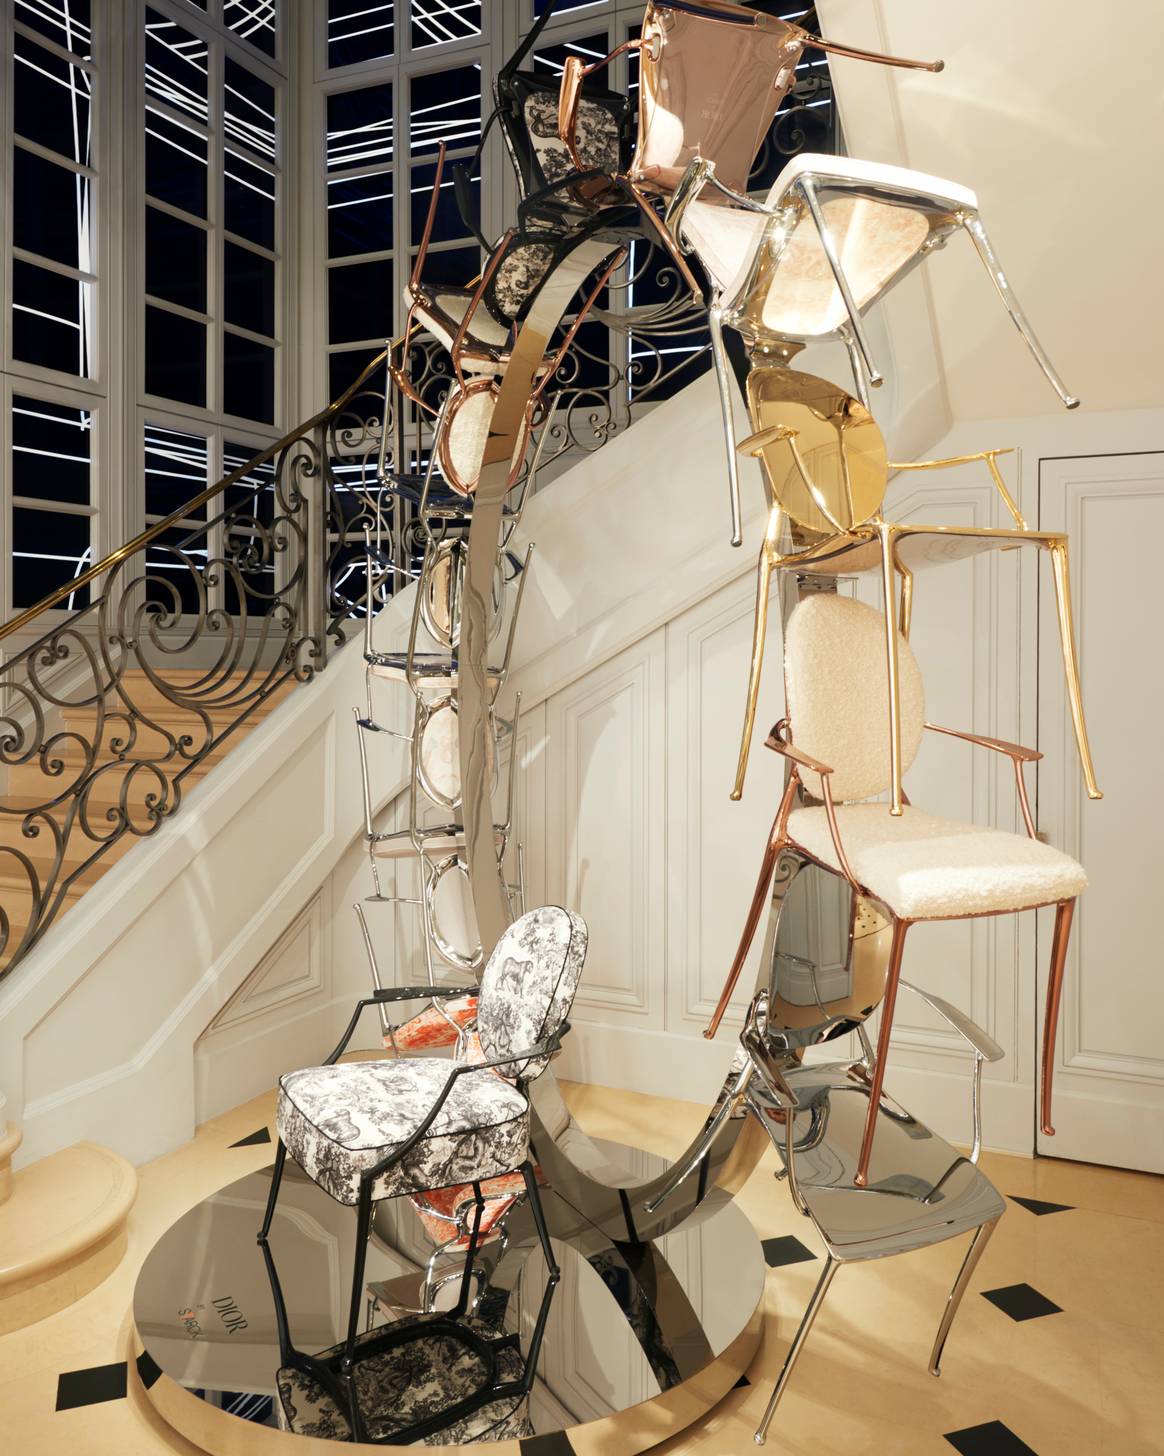 The Monsieur Dior armchair by Dior by Starck. Photo: Dior